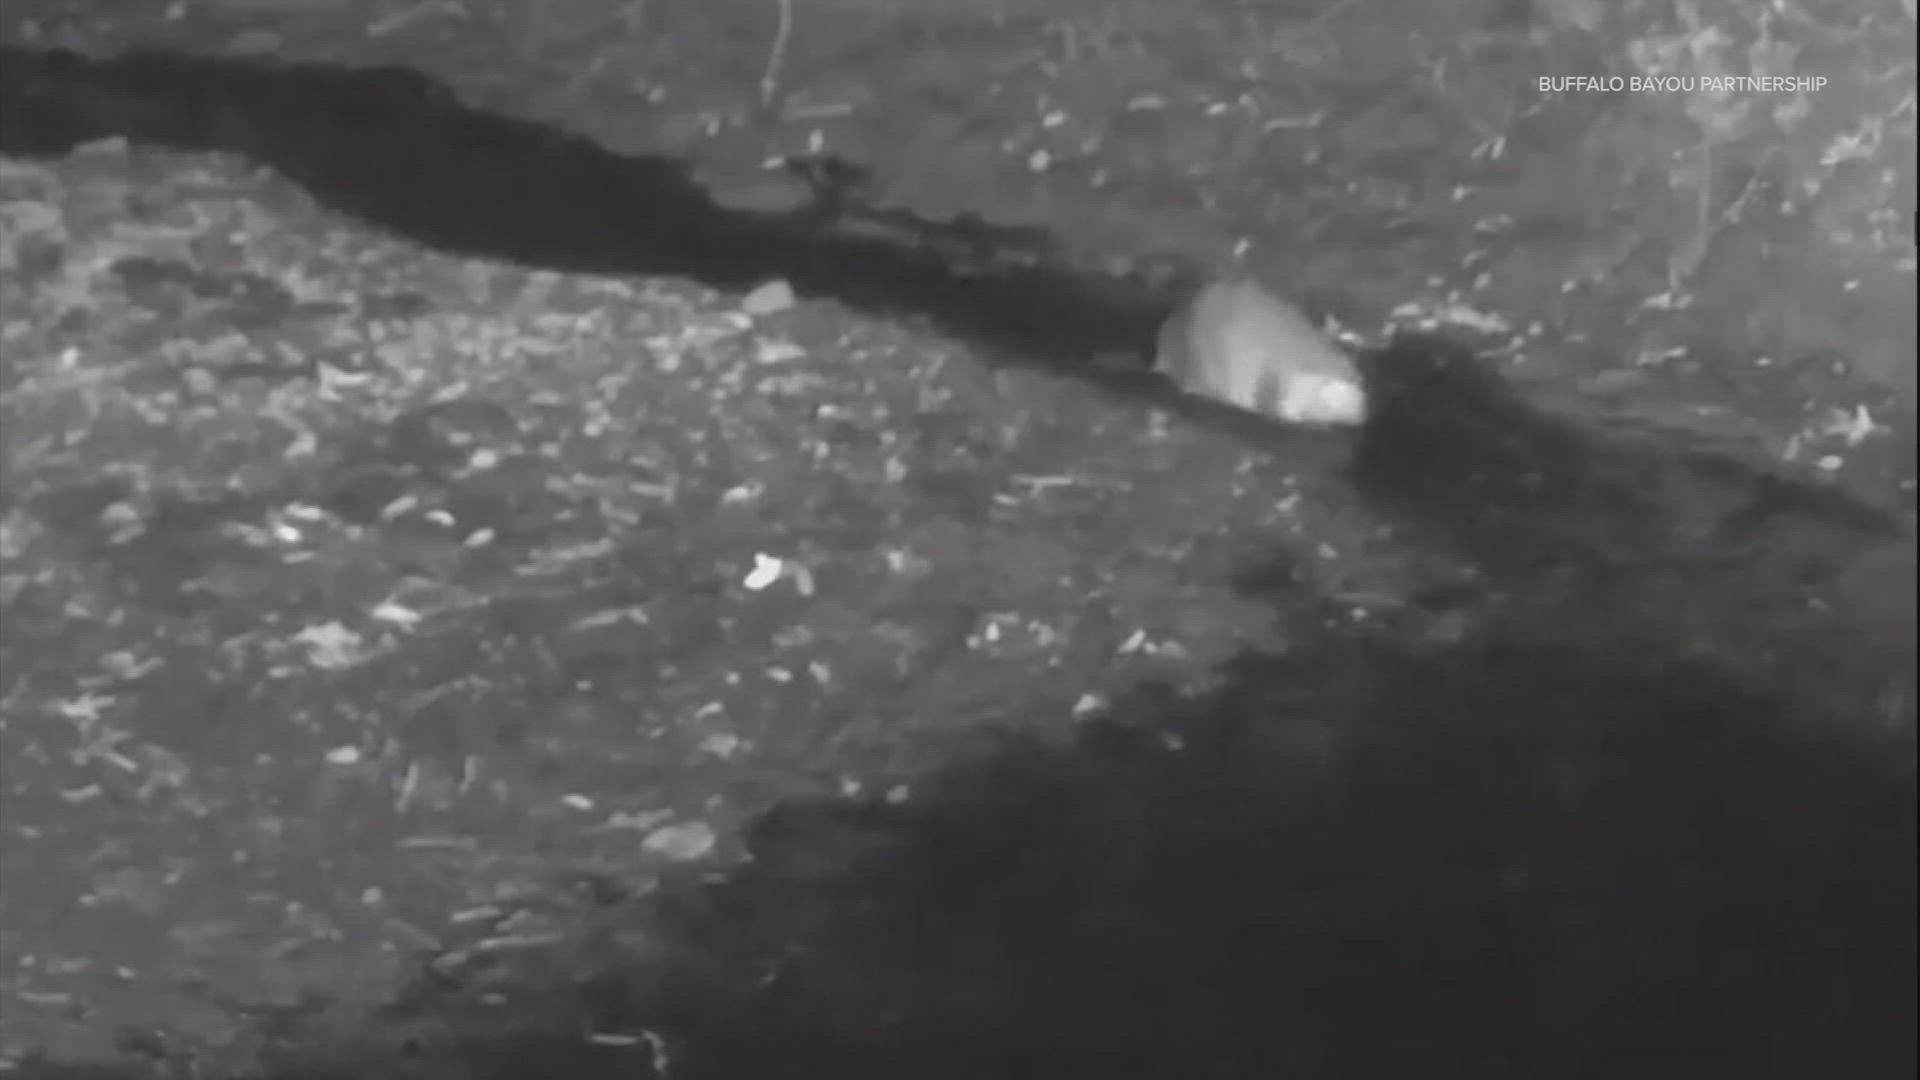 The elusive beaver in Buffalo Bayou has finally been captured on video. The Buffalo Bayou Partnership shared the video and said there might be two of them.